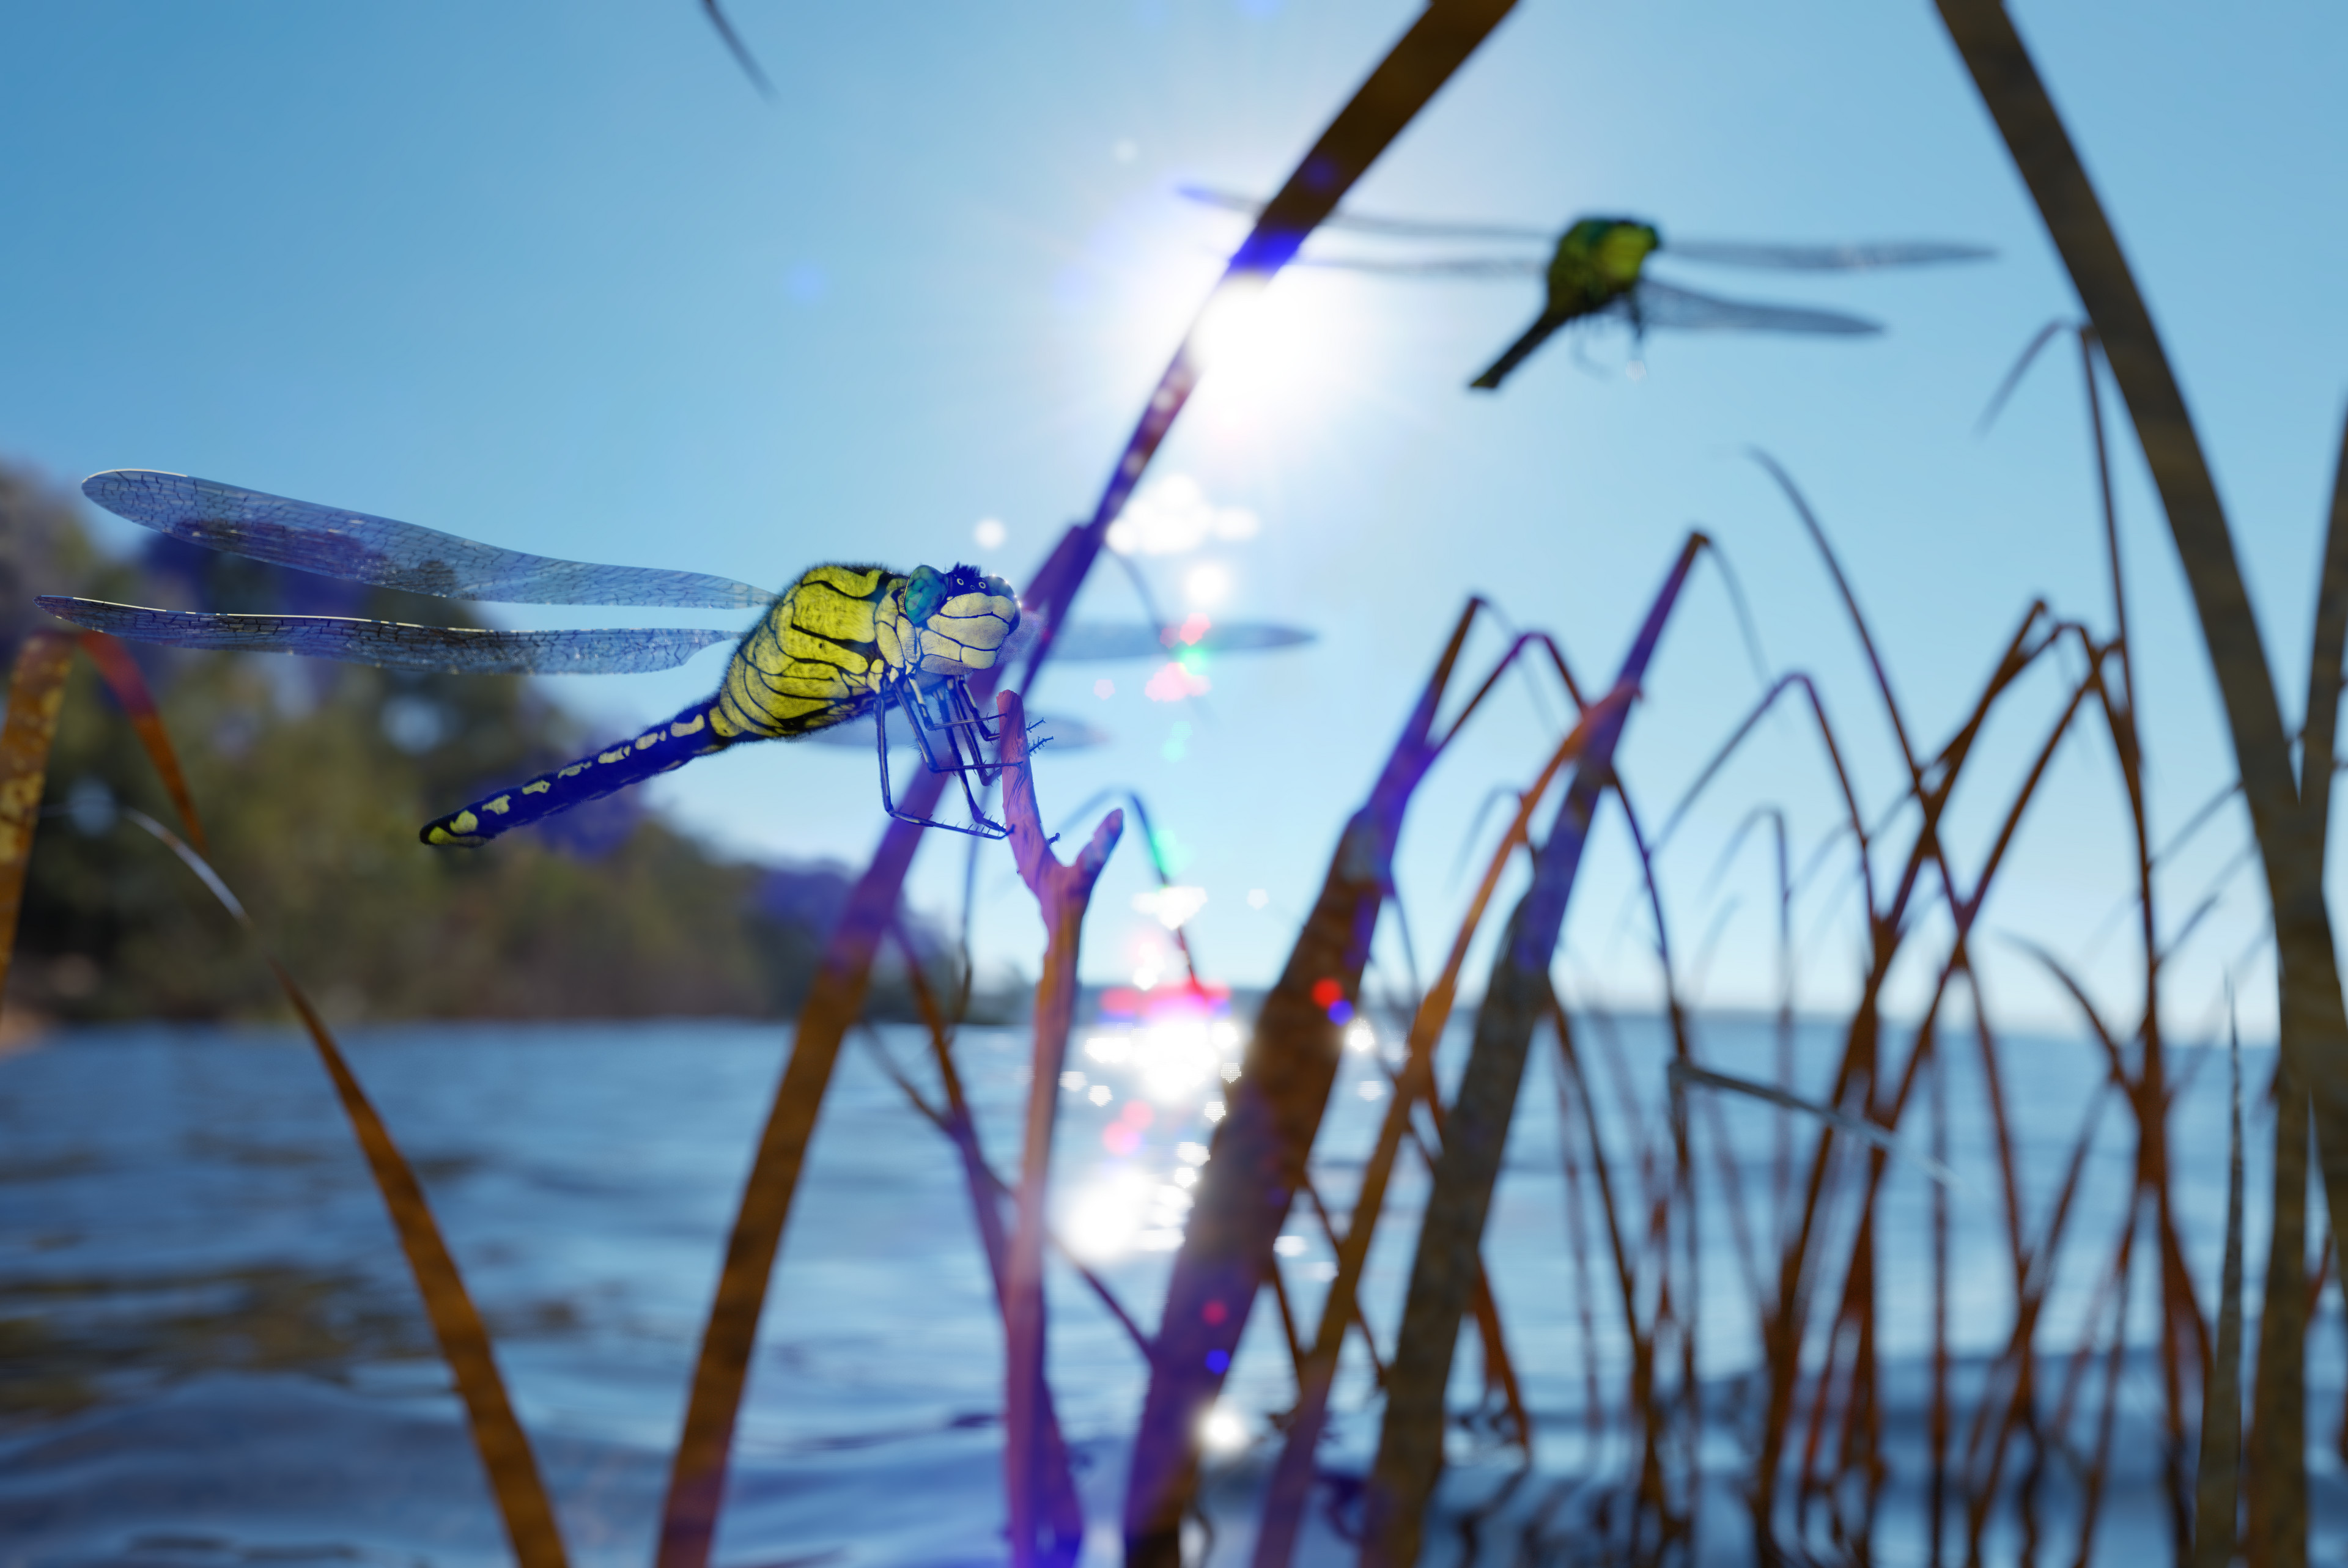 The image of the Dragonfly perched on the sun dried stalk in the middle of a lake says a lot about the relationship it has with nature’s gifts to man such as lakes.

The sun at the background visually suggests looking for hope for a brighter future.